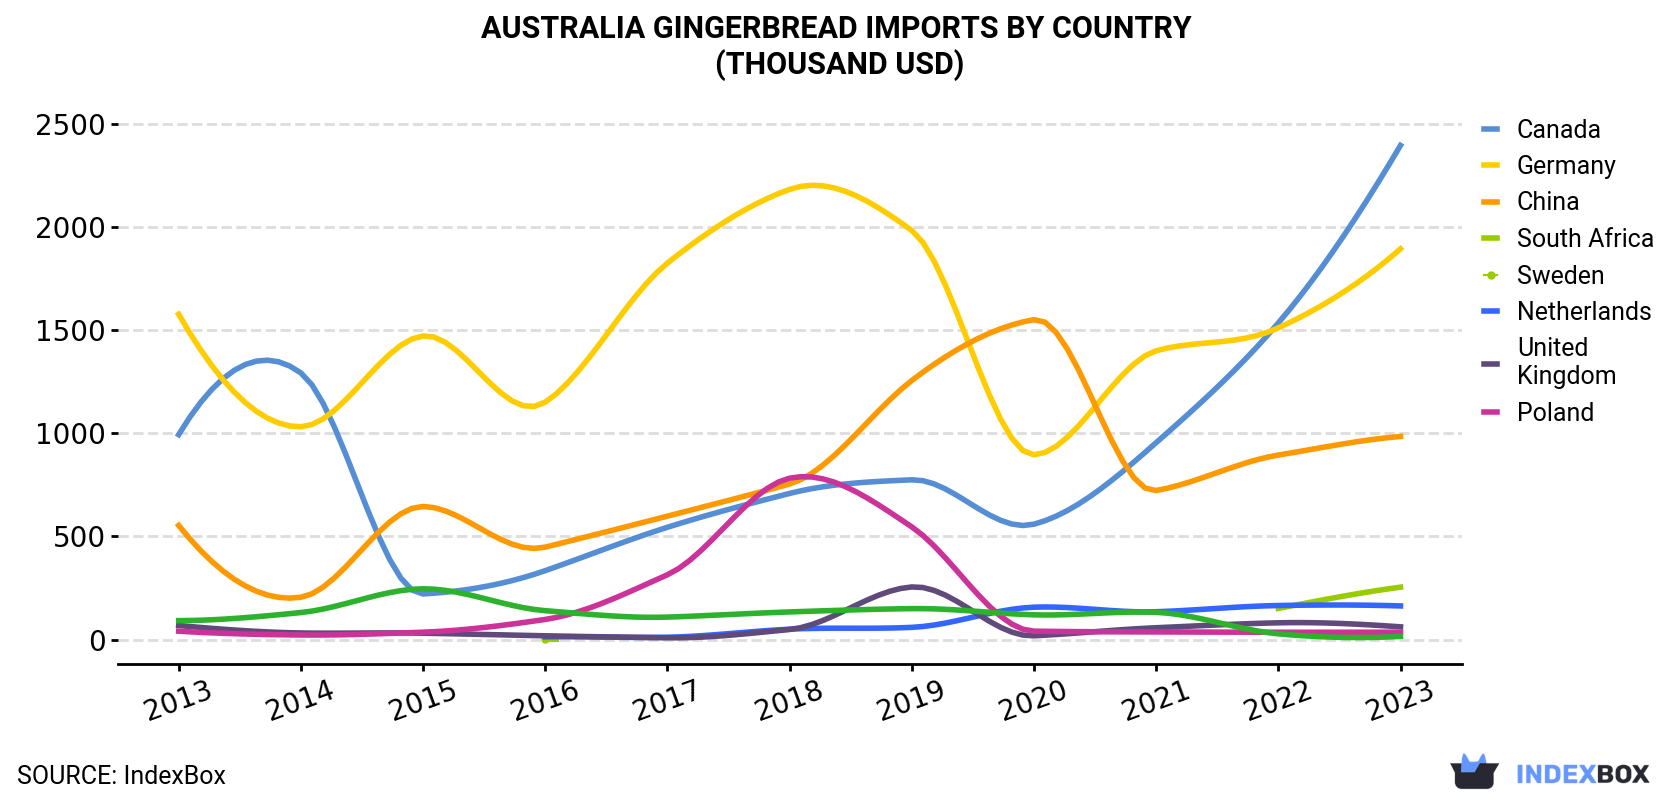 Australia Gingerbread Imports By Country (Thousand USD)